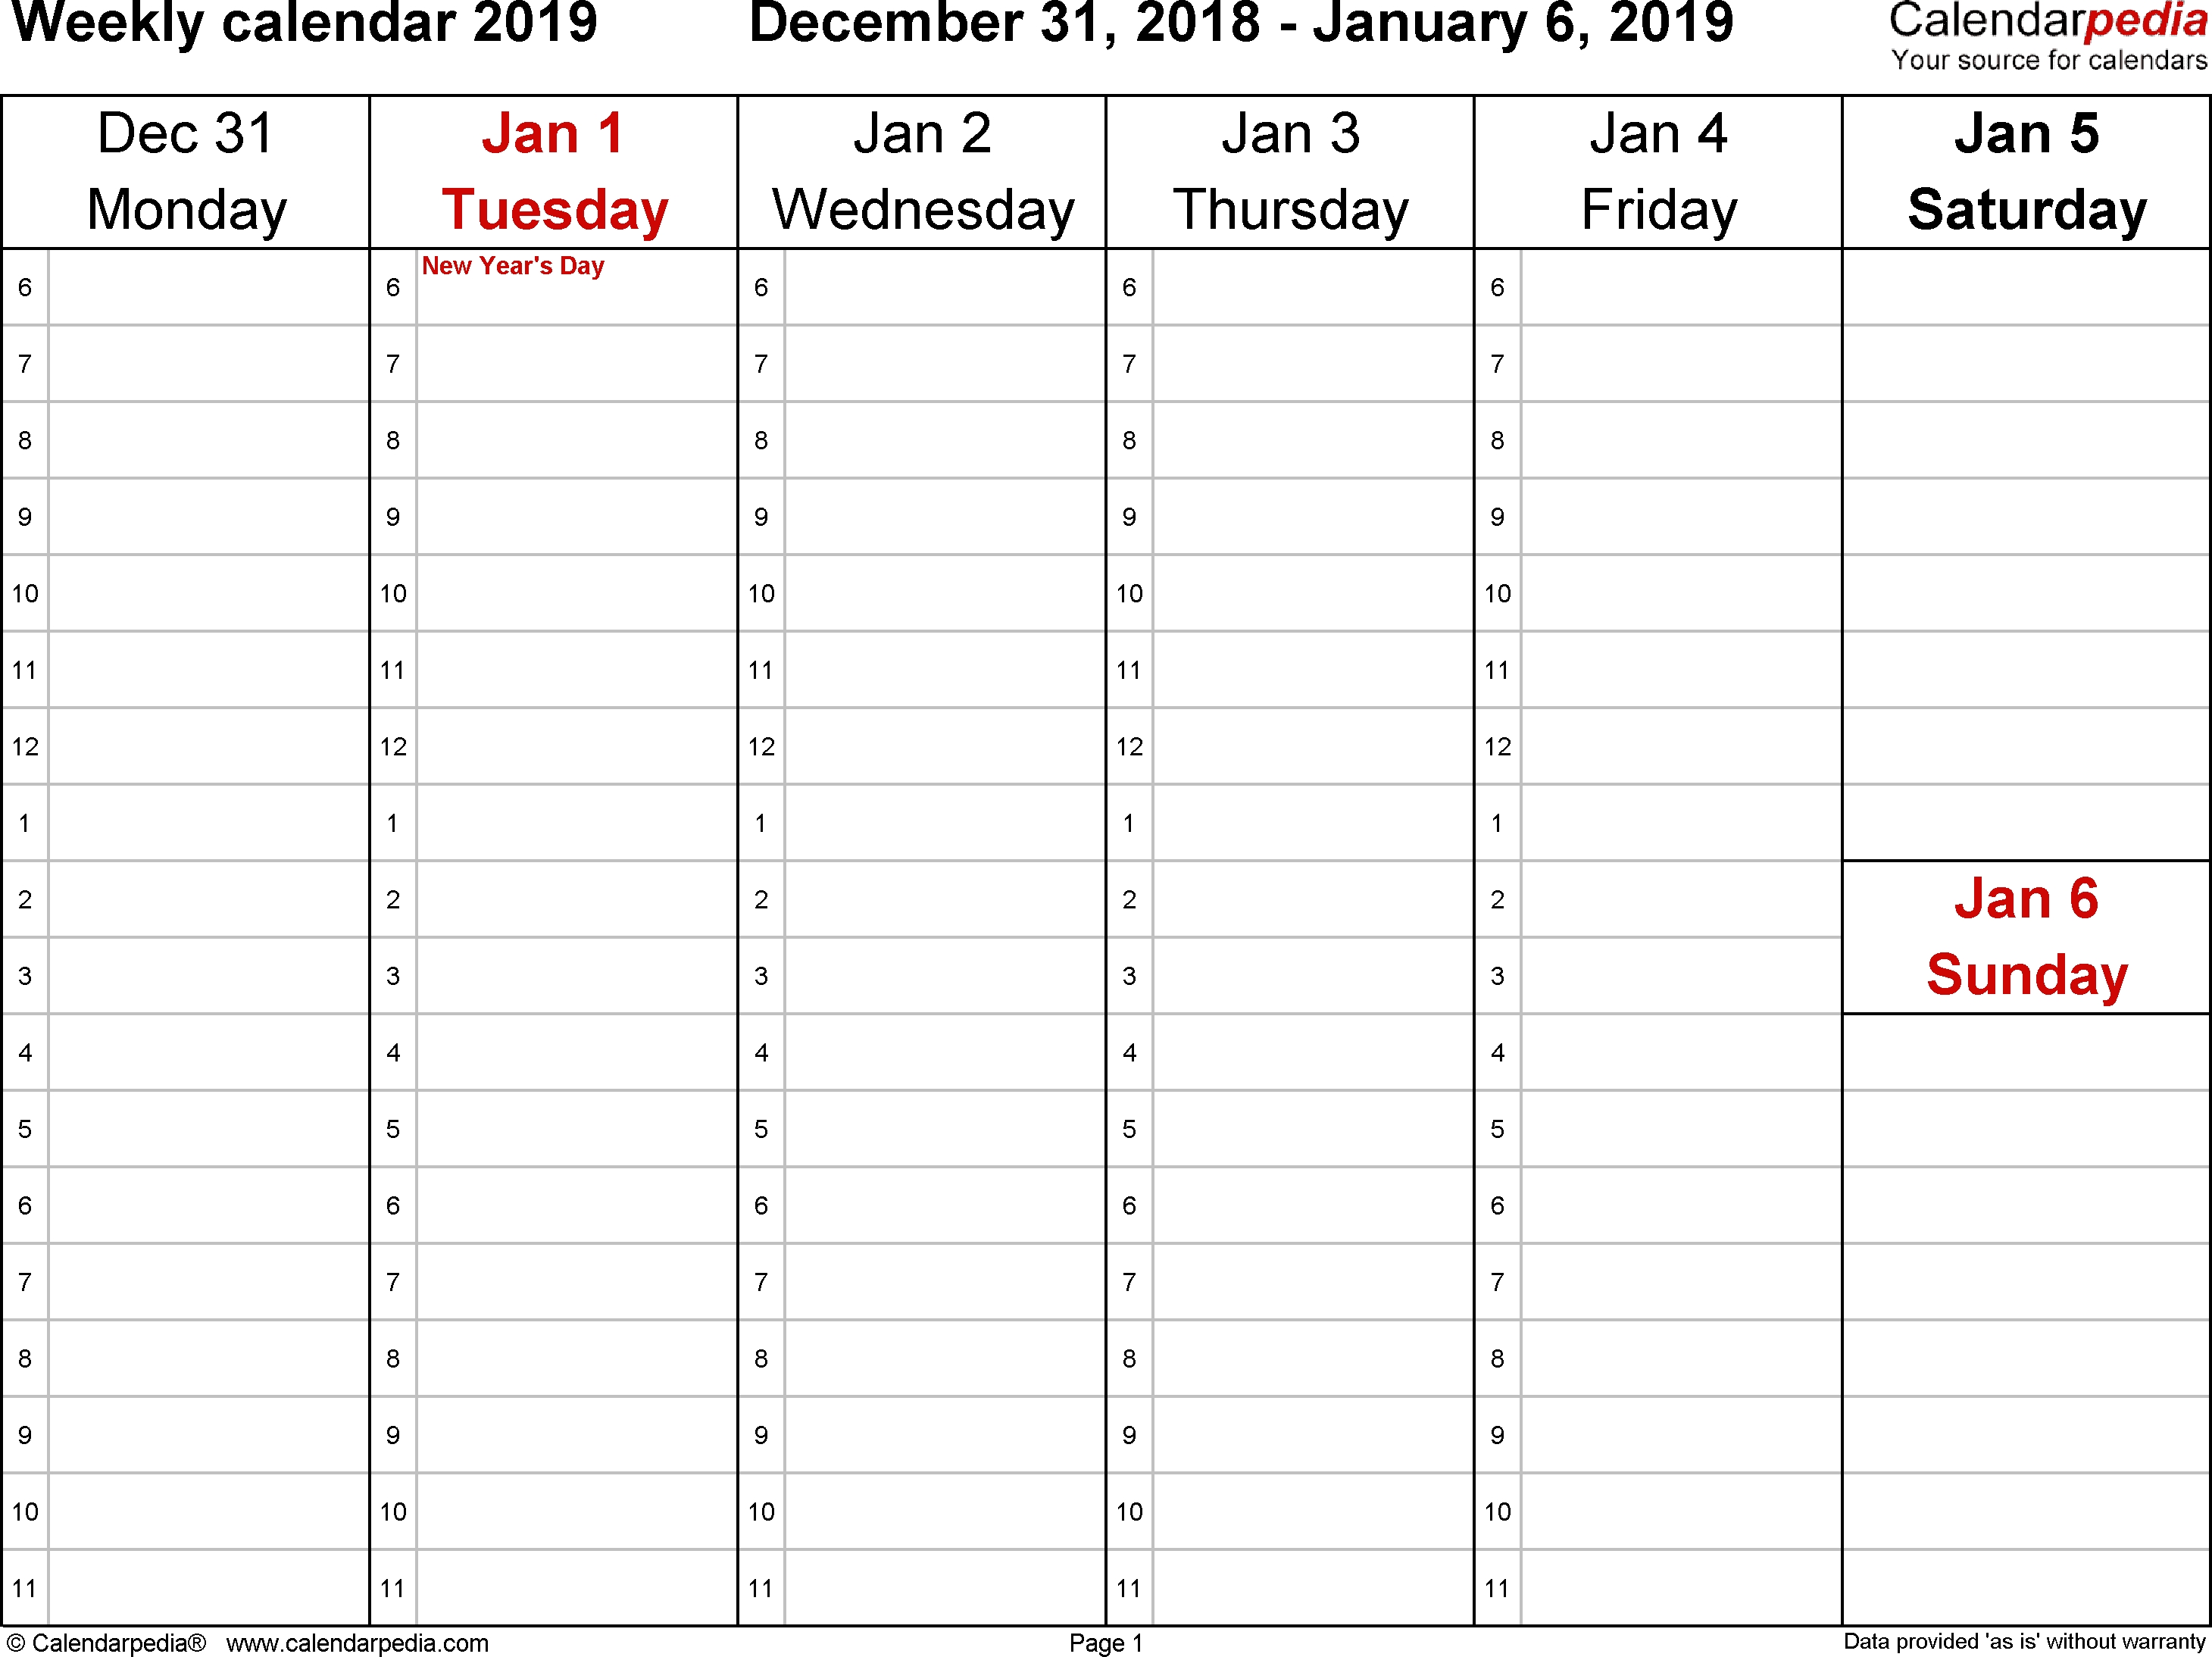 Weekly Calendar 2019 For Word - 12 Free Printable Templates for One Week Calendar Template With Hours